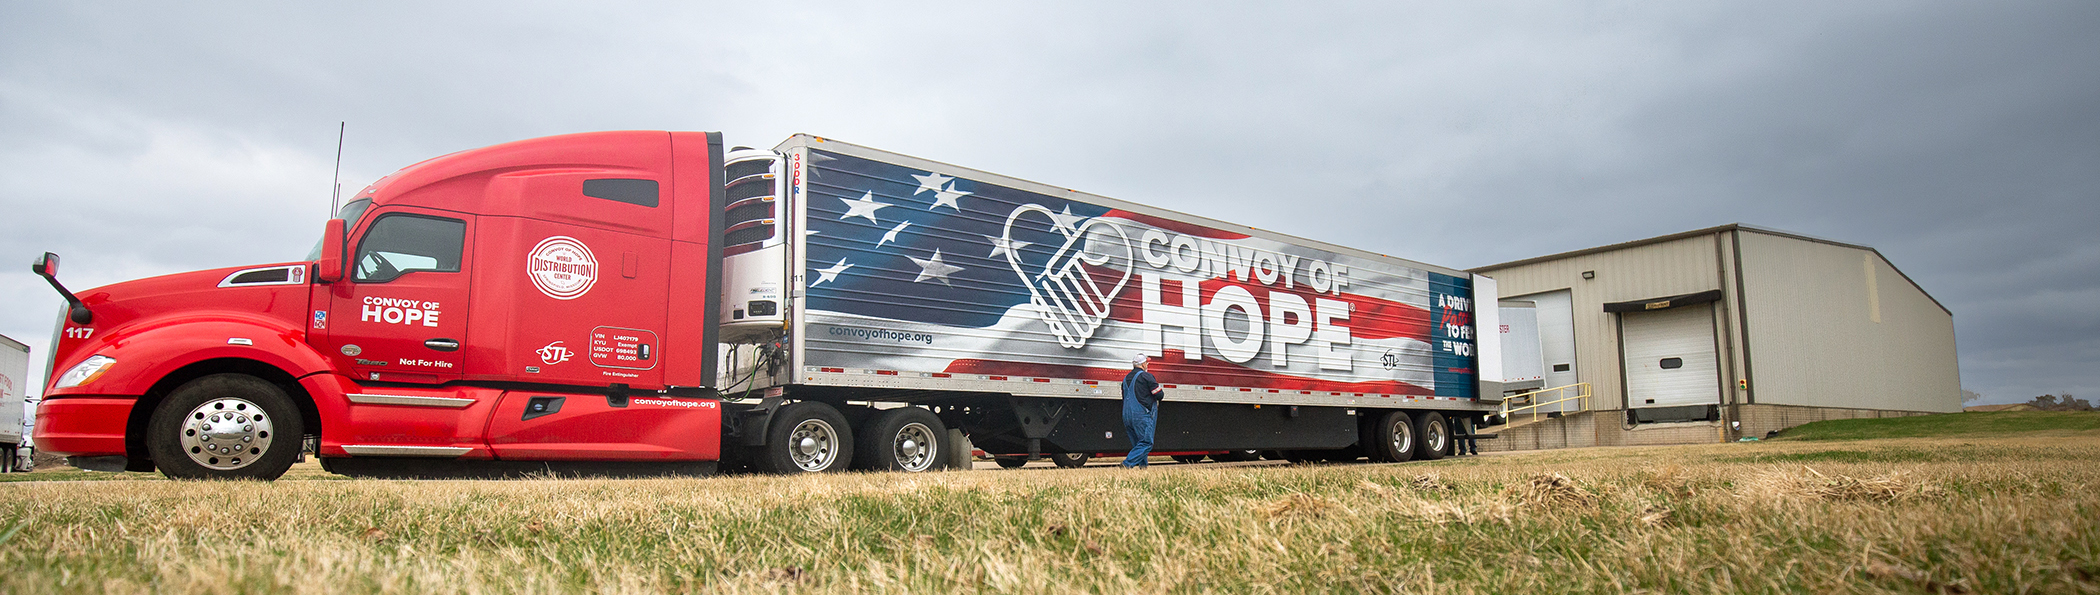 Convoy of Hope truck cropped